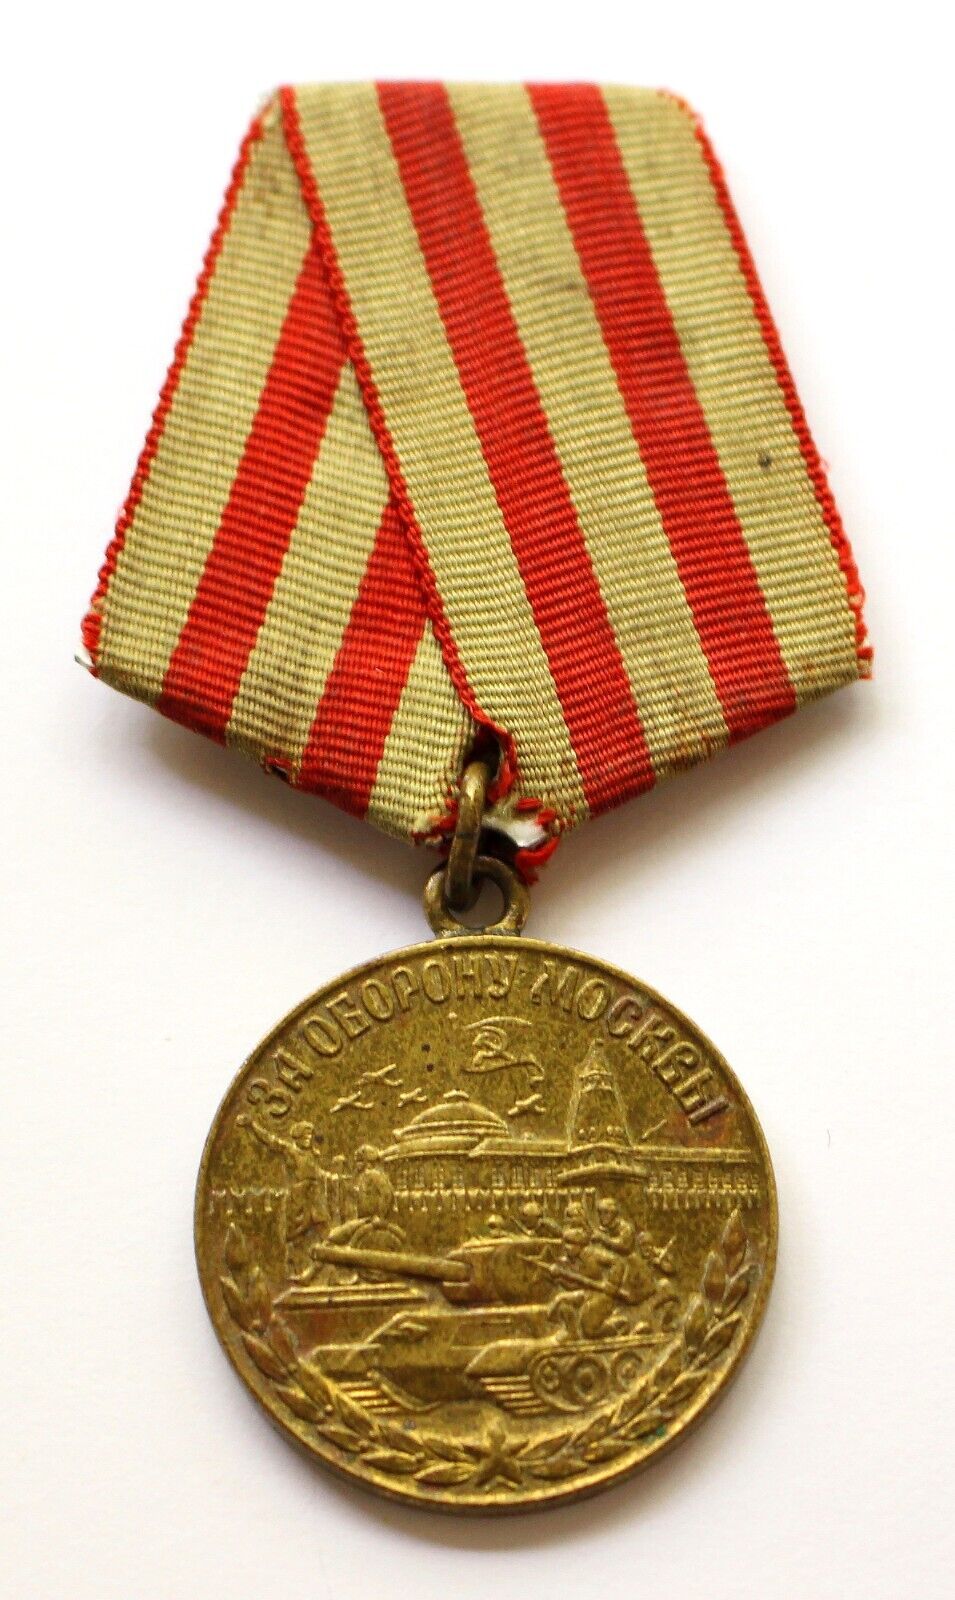 Original Old Soviet Russian Medal Defense of Moscow WWII USSR CCCP